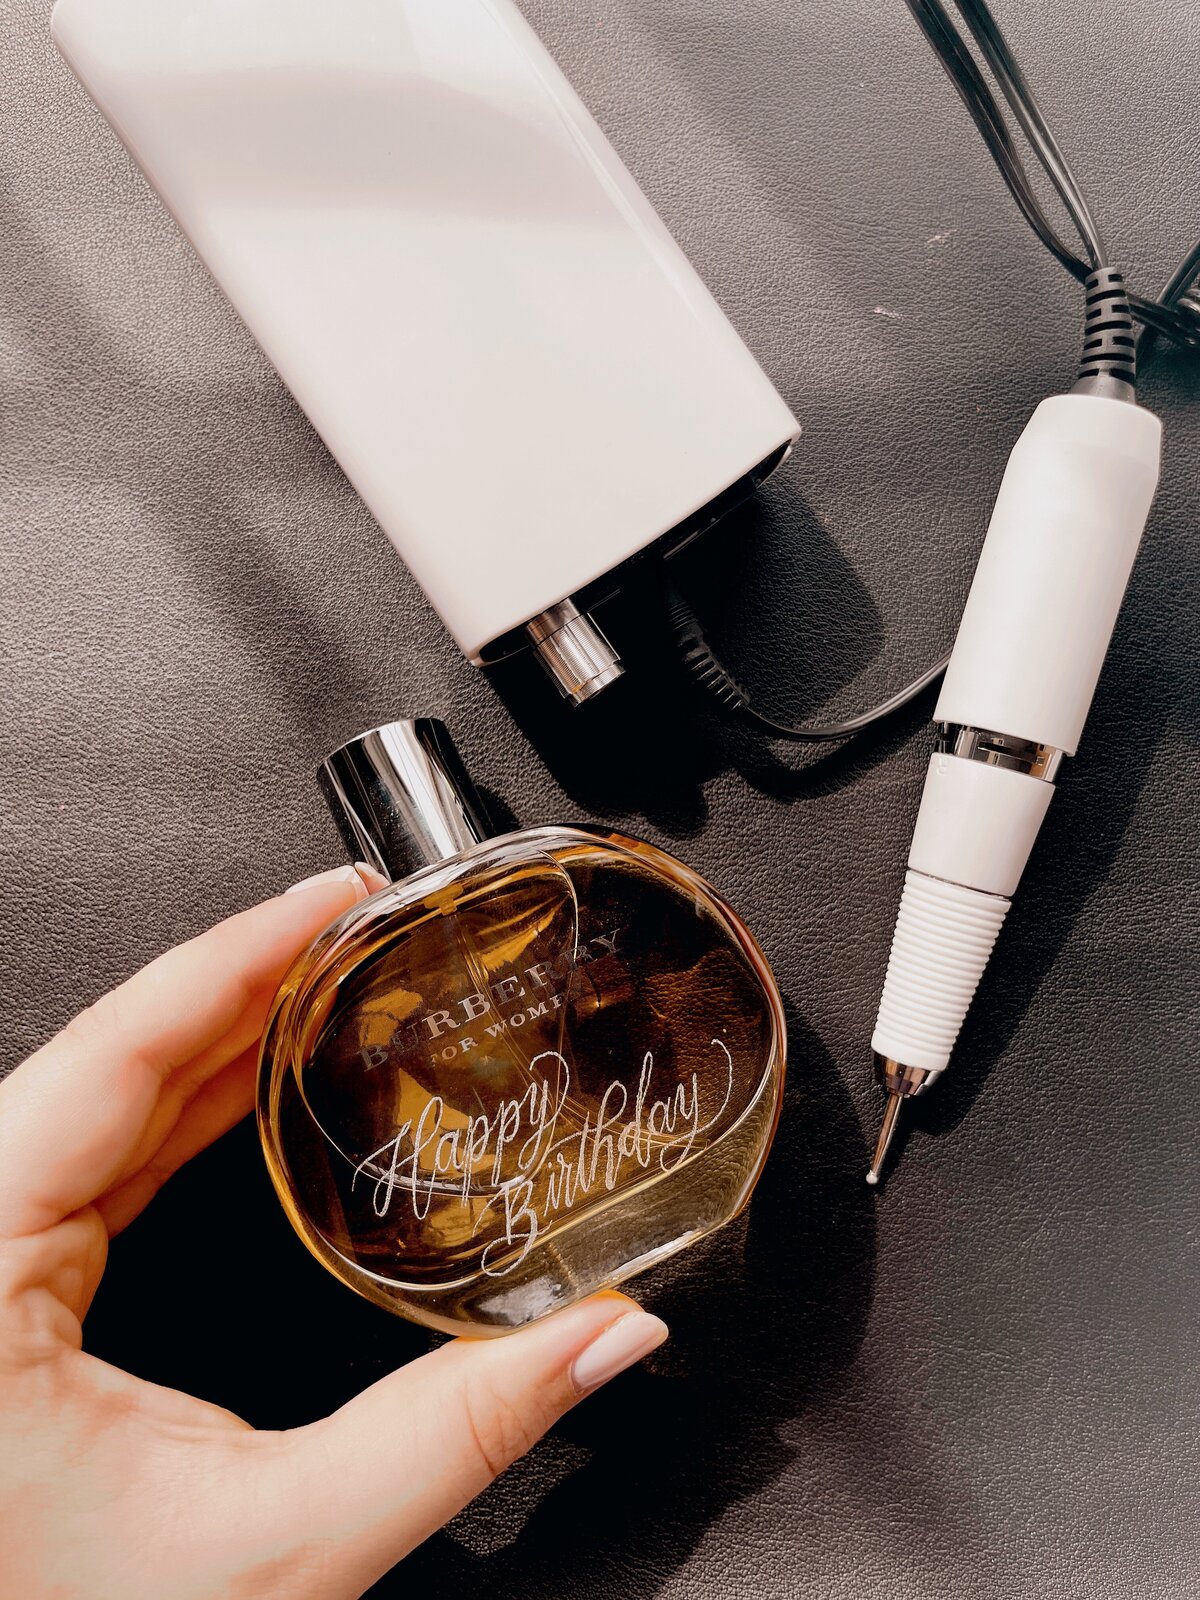 Perfume Bottle Engraving with Calligraphy in Cleveland, Ohio